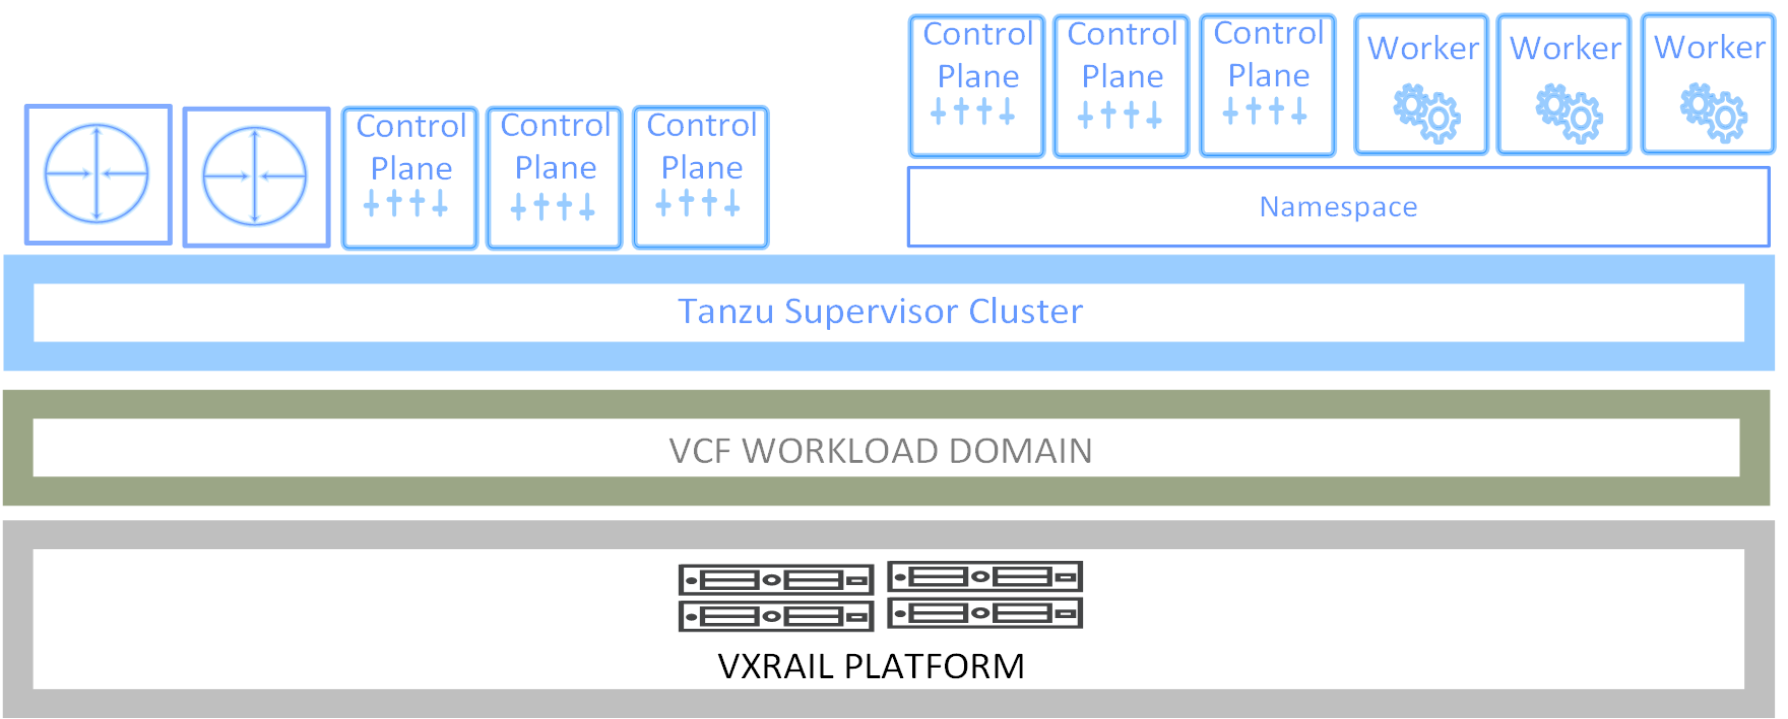 This figure shows vSphere for Tanzu workload domain management components.